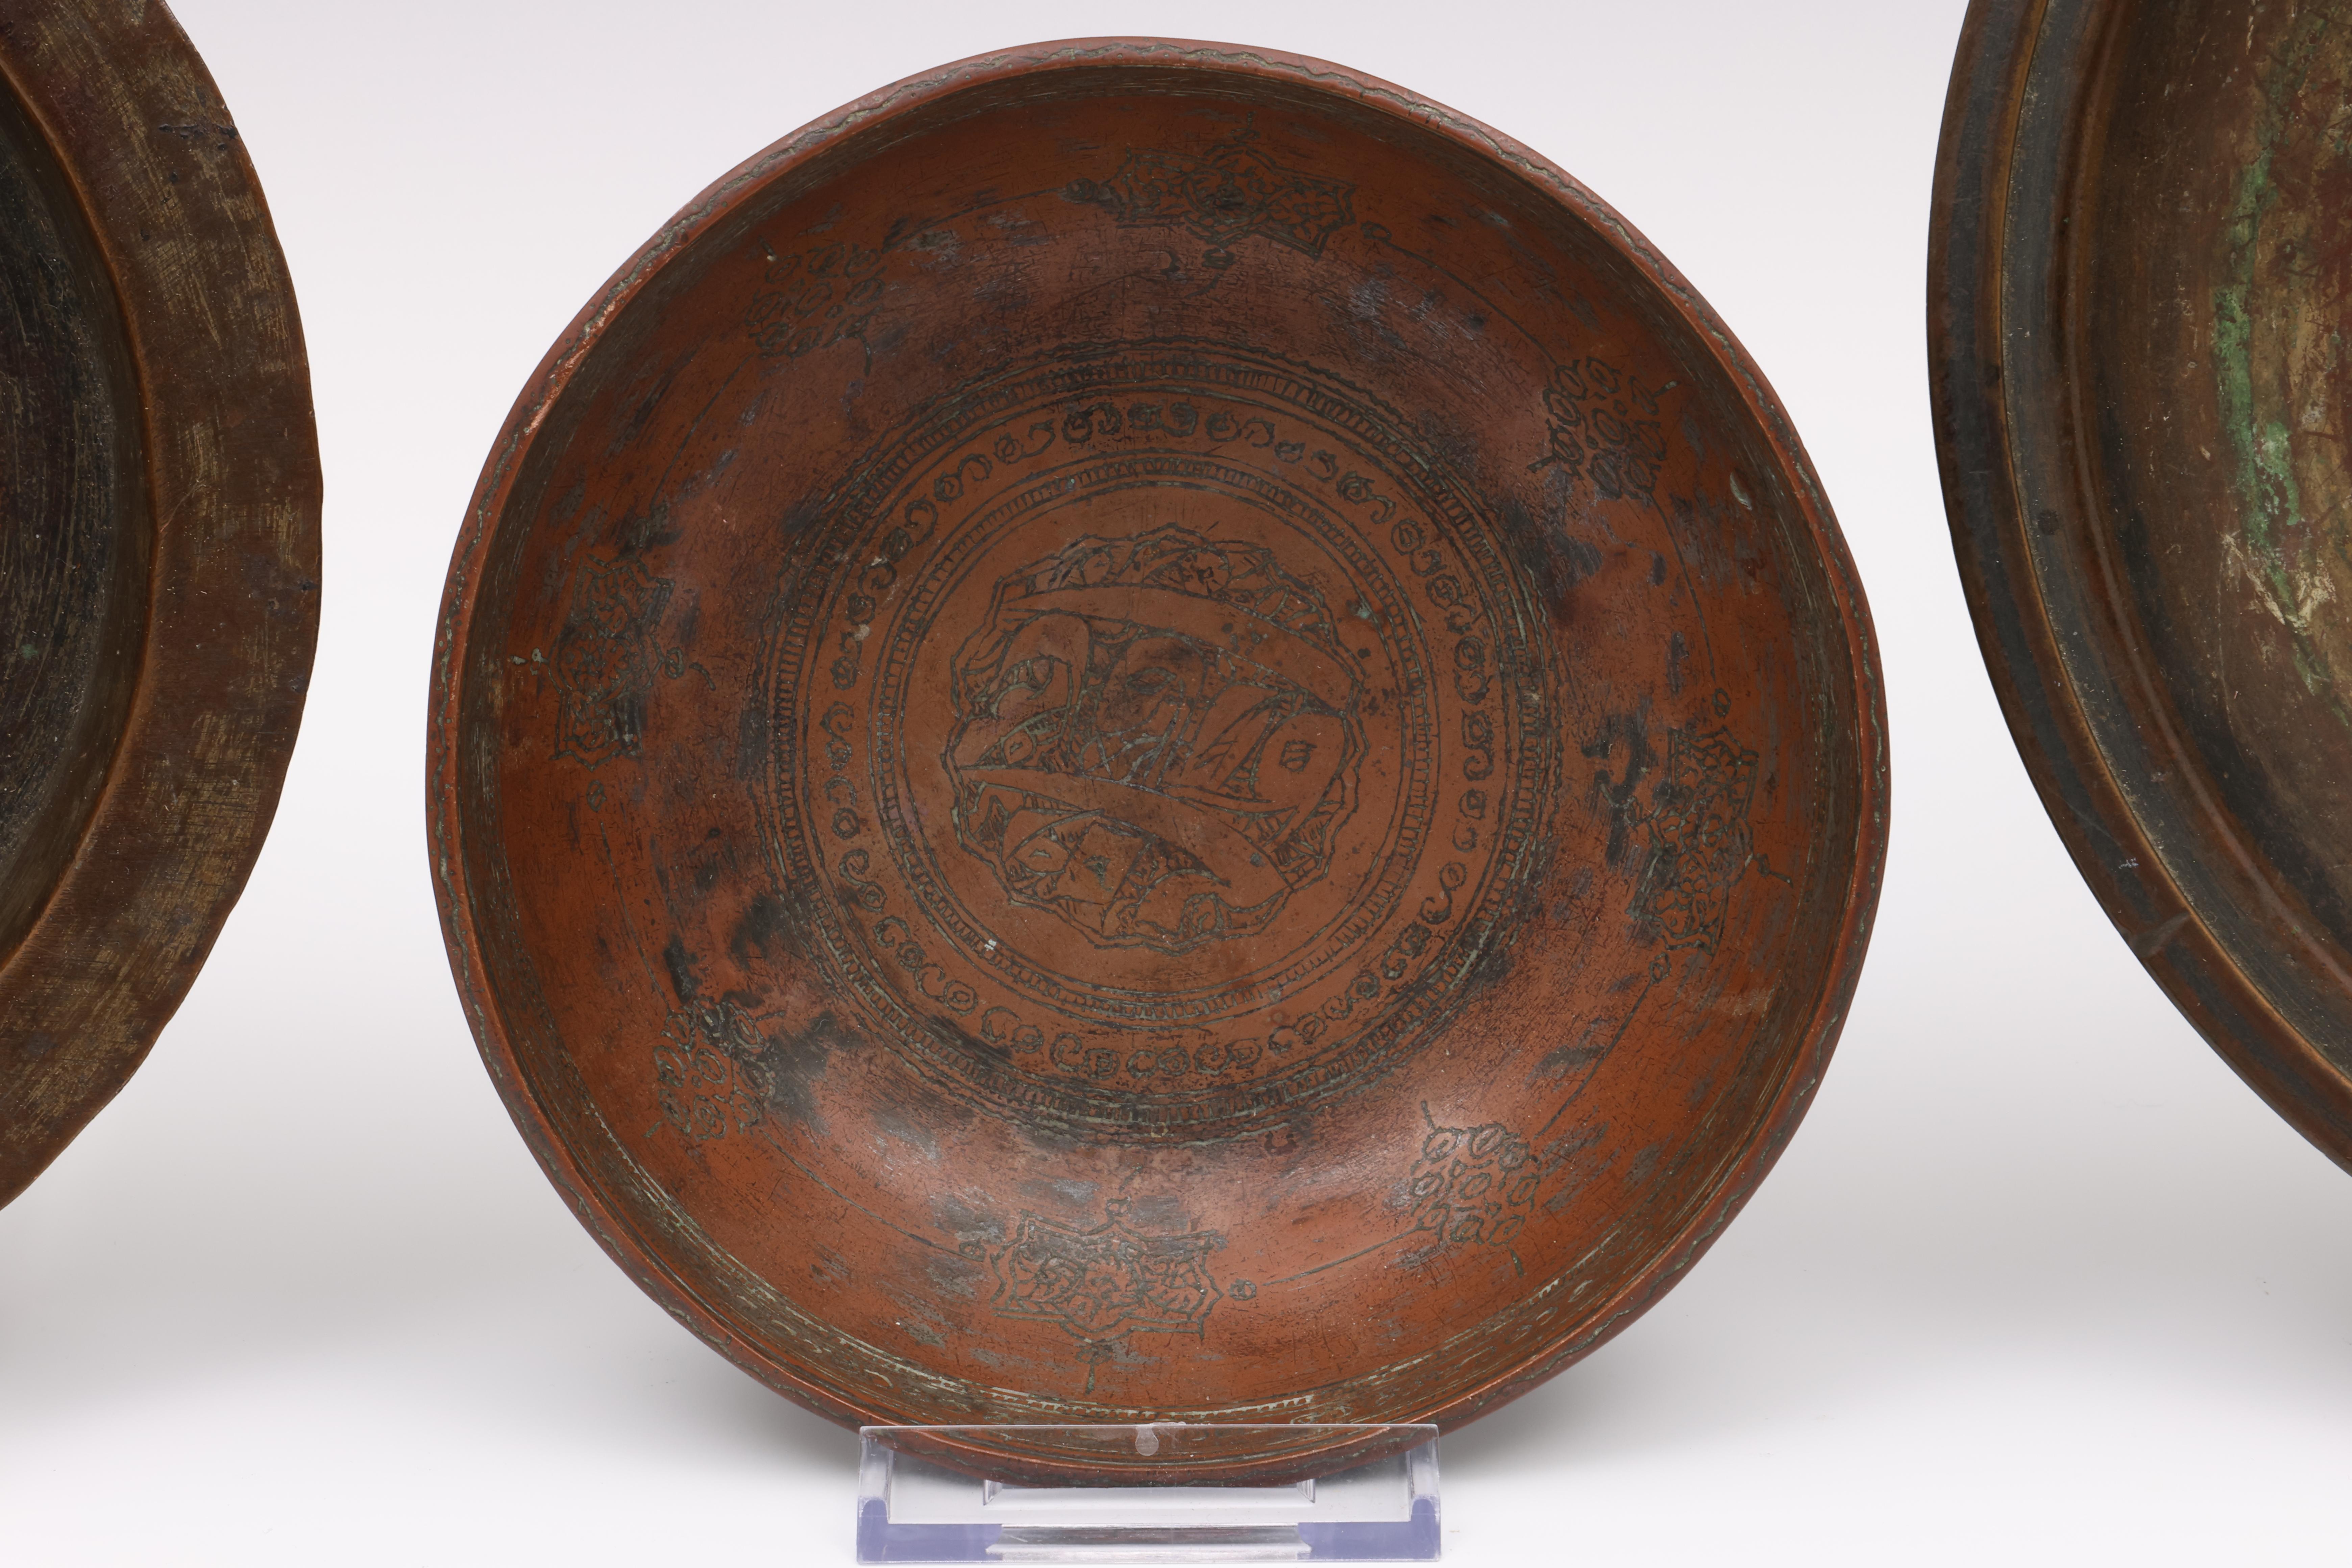 Six Persian and Ottoman bronze bowls, 11th - 17th century; - Image 5 of 5